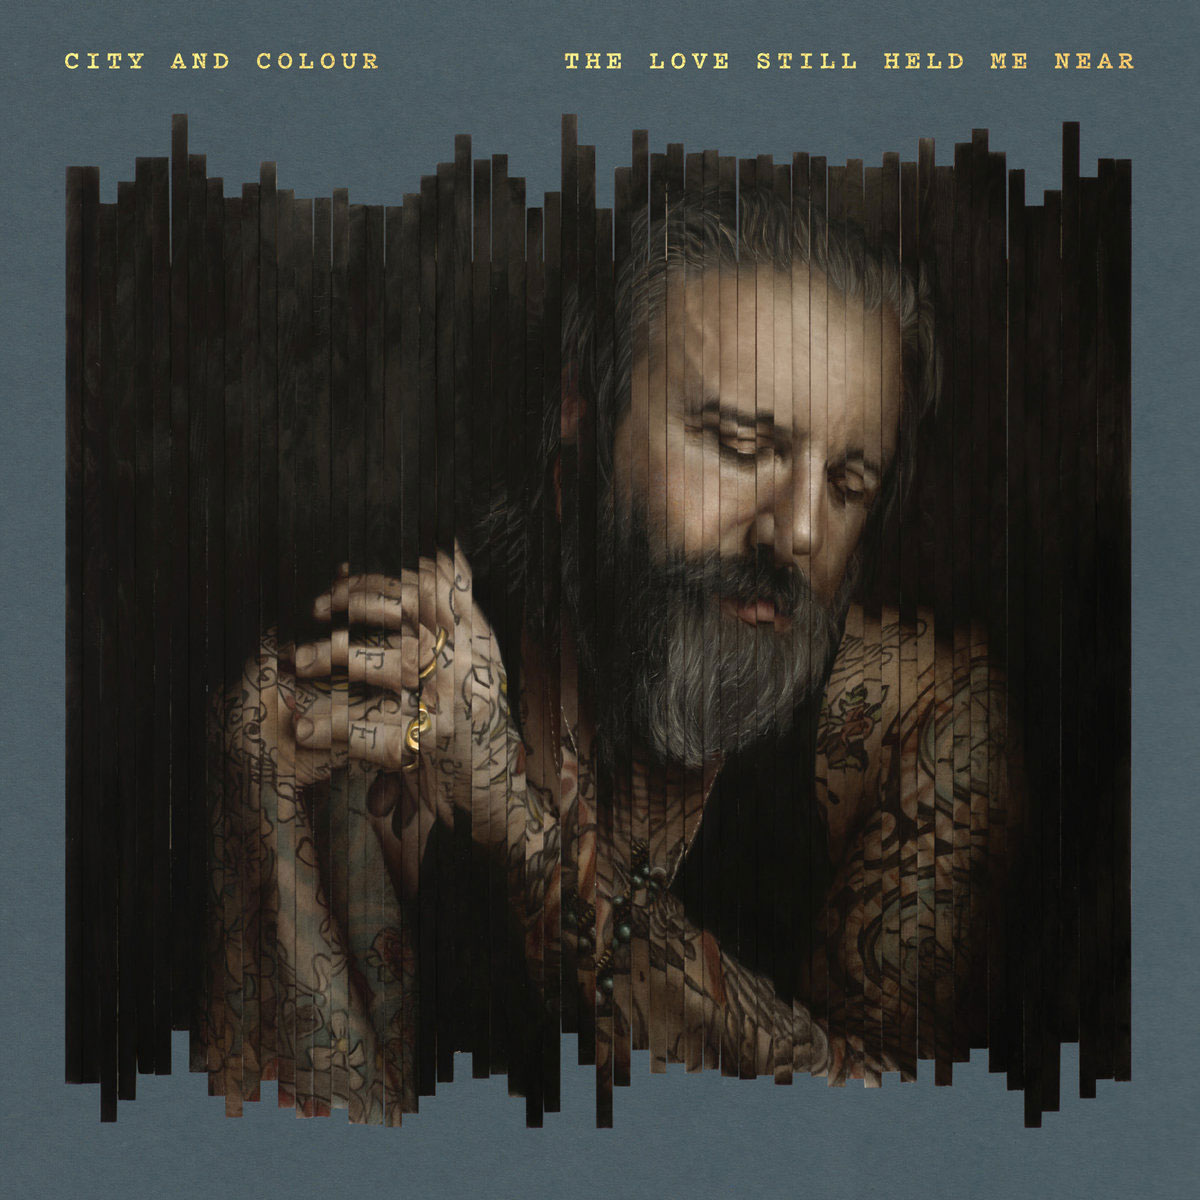 Discographie - City and Colour - Dallas Green - The Love That Held Me Near